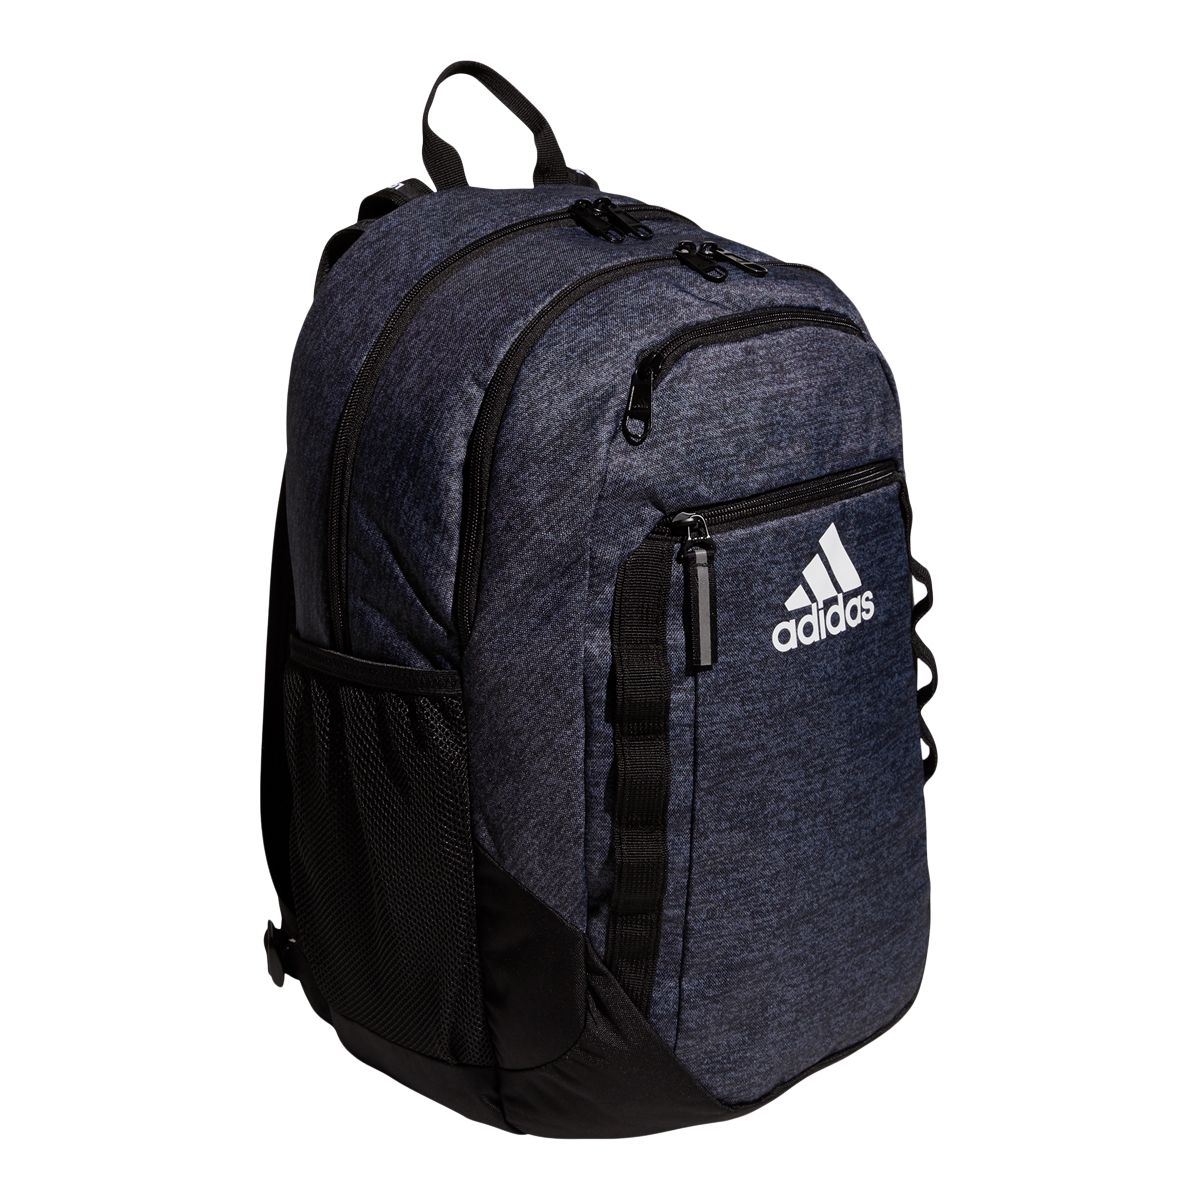 Image of adidas Excel VI Backpack